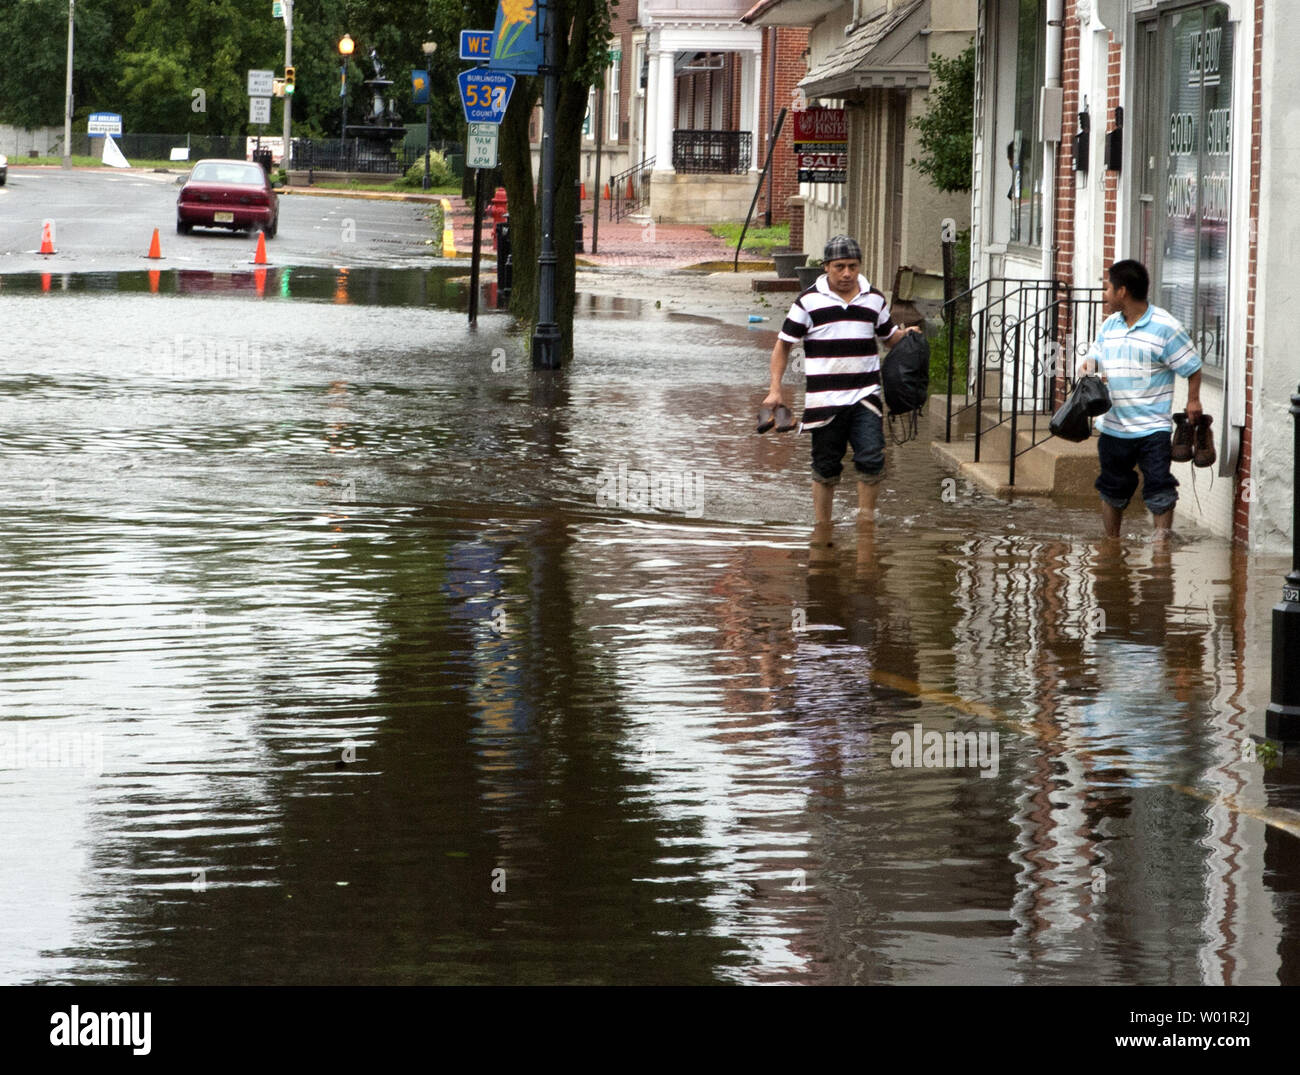 Two residents of Mt. Holly, New Jersey hold their shoes as they make their way along a flooded street from the intense rain produced by Hurricane Irene August 28, 2011. Some 800,000 people were evacuated from the Jersey Shore because of the Category One storm.    UPI/John Anderson Stock Photo